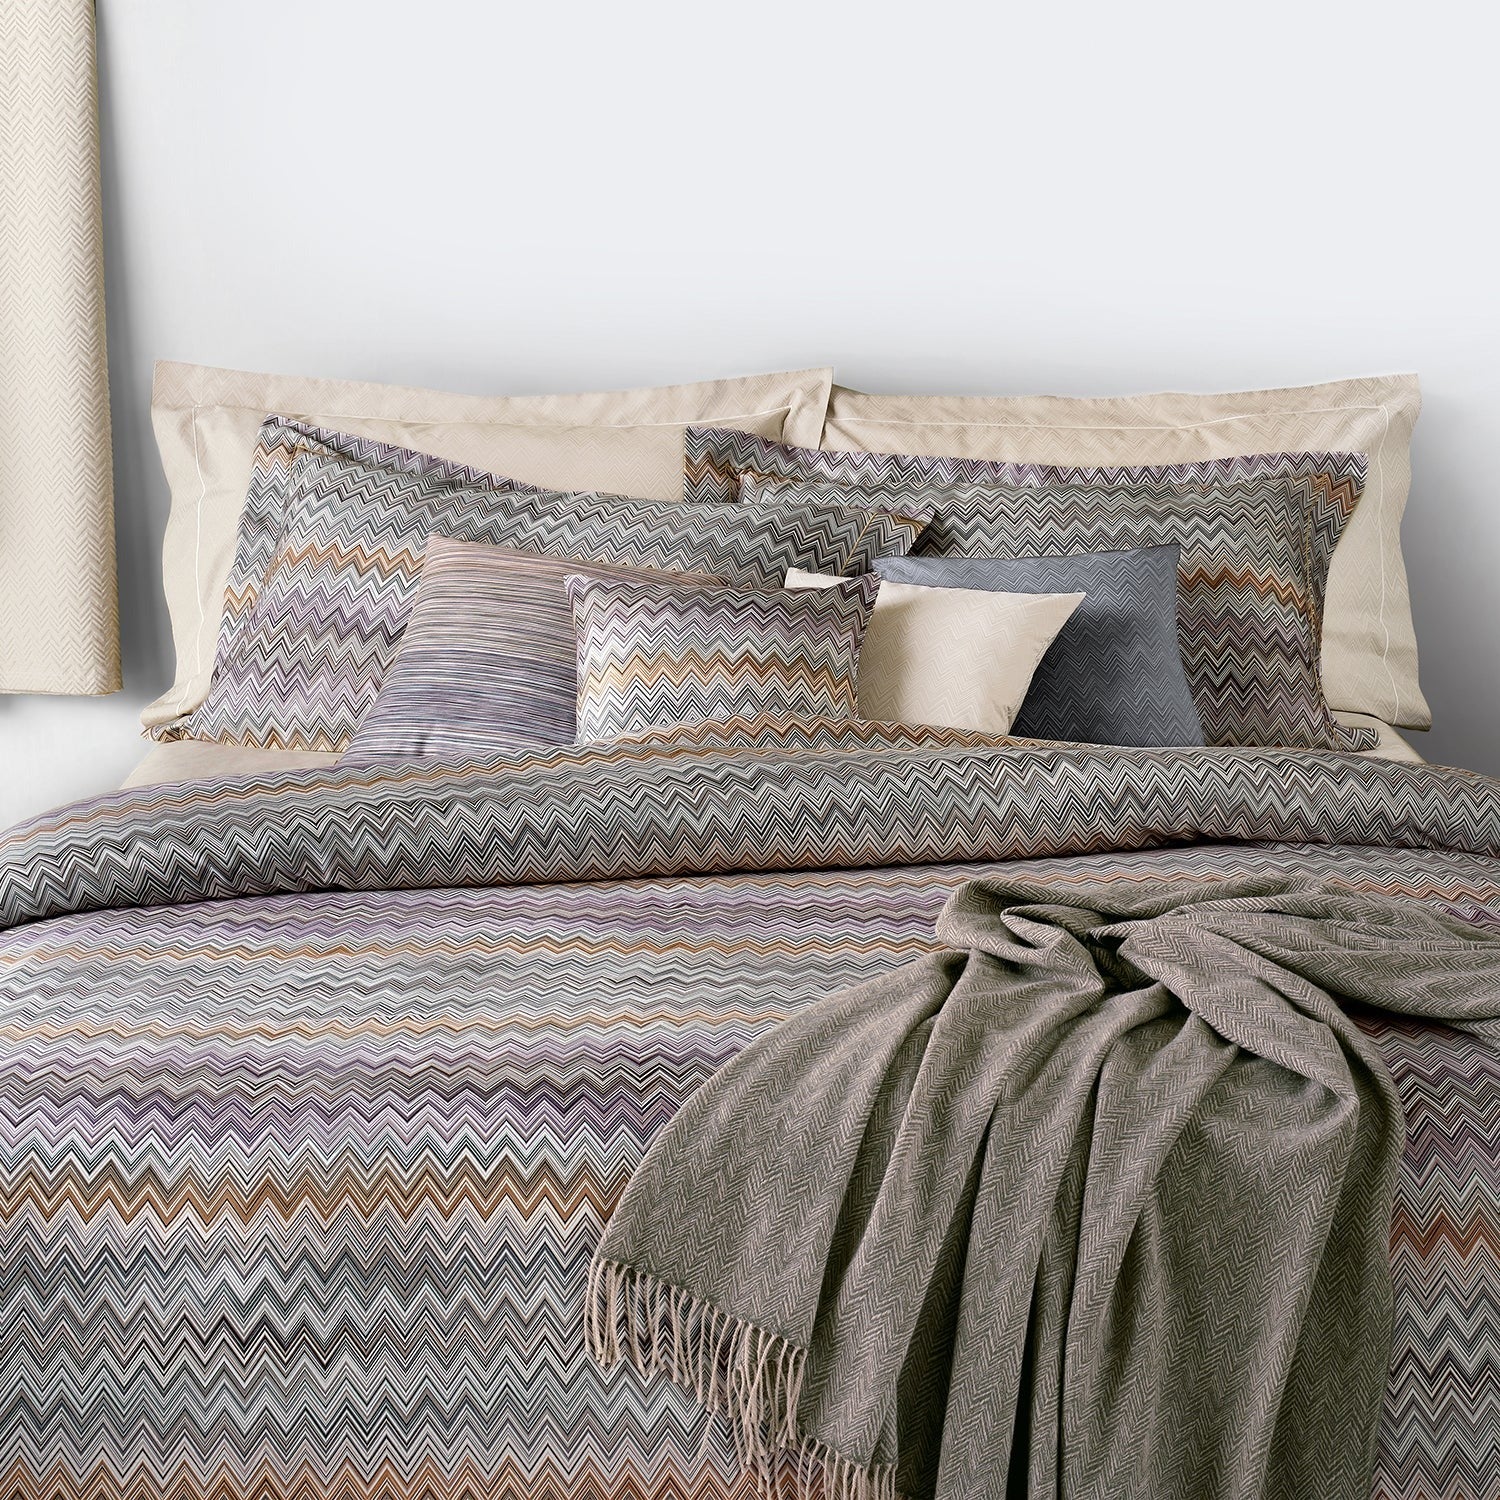 Missoni bedding is stunning and luxurious. 